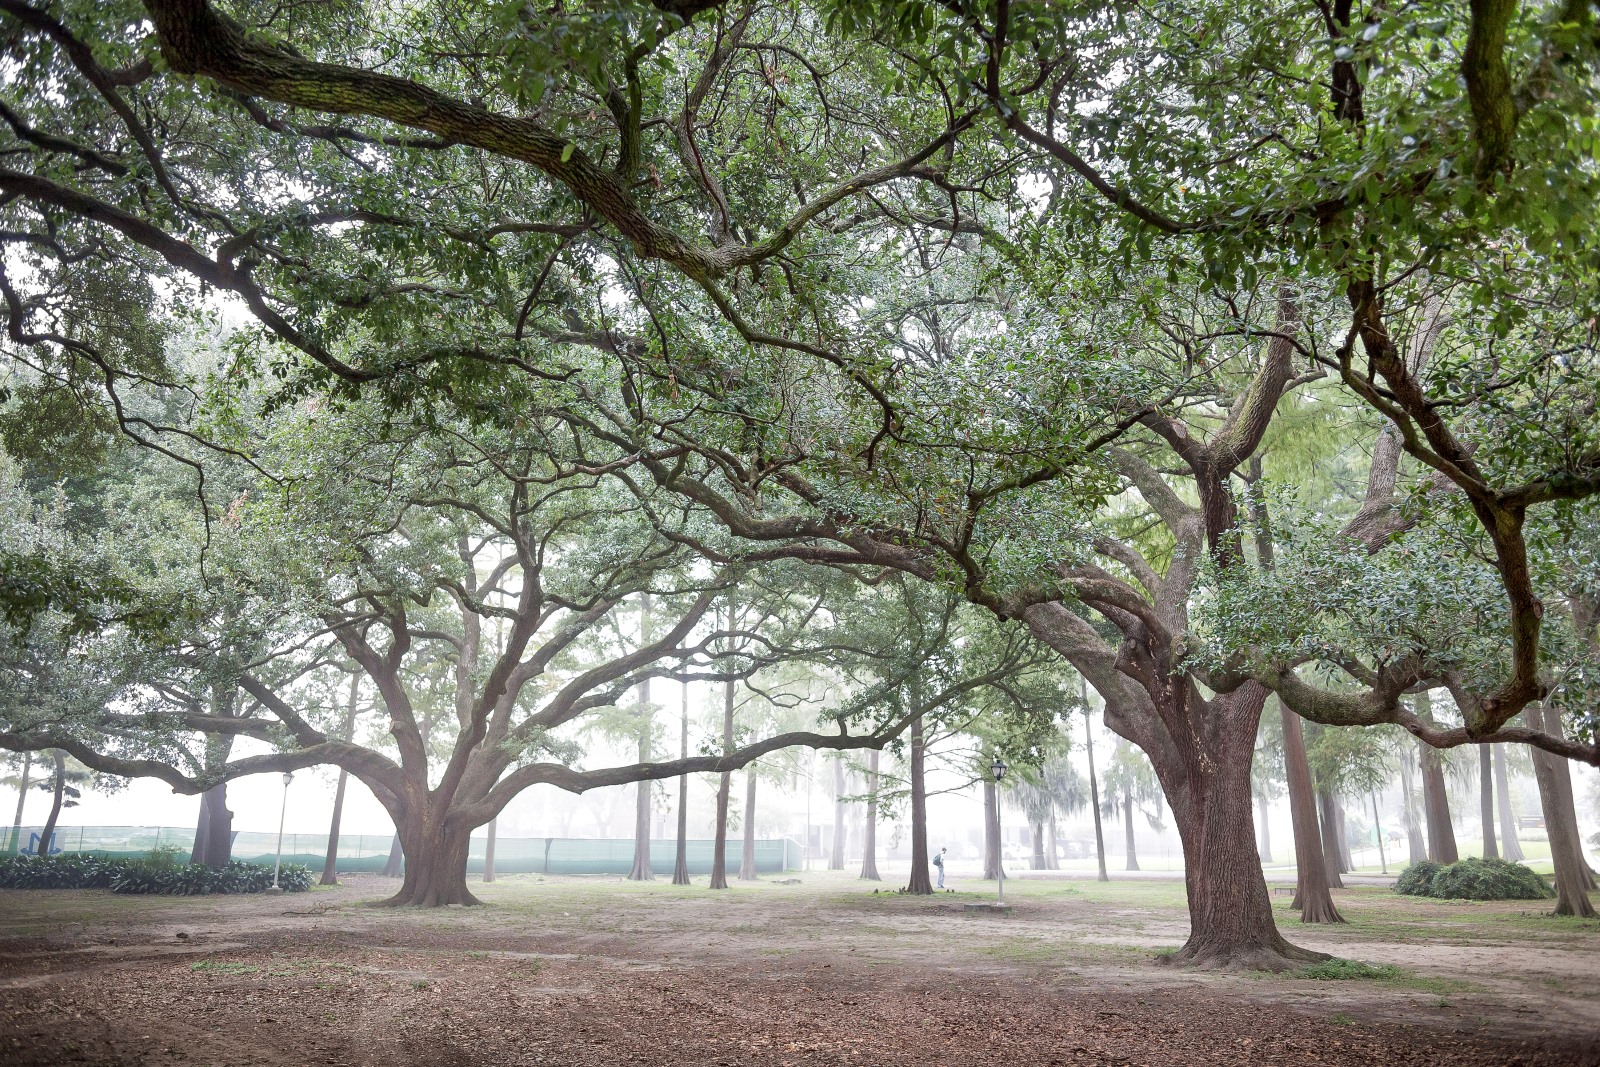 Enchanted forest on LSU campus